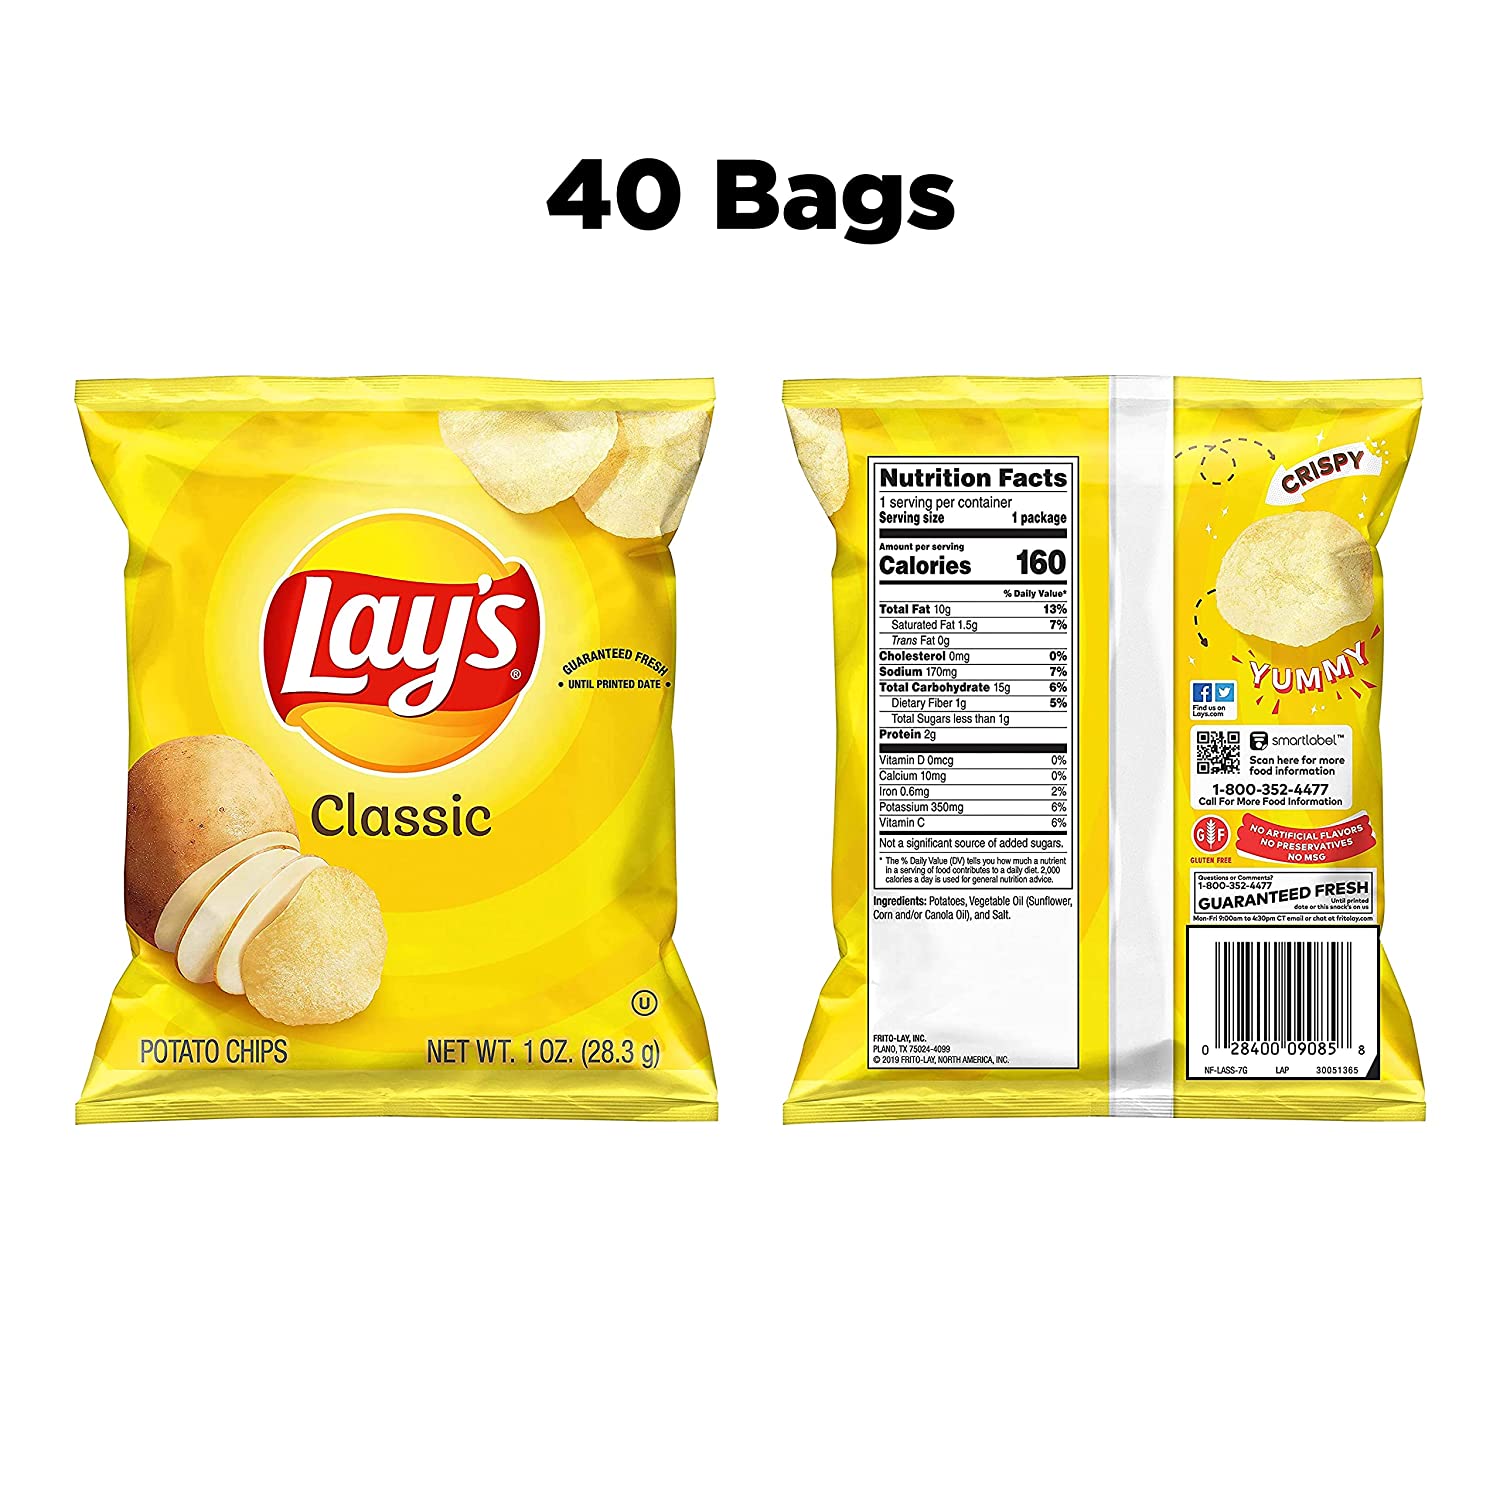 Detail Lays Potato Chips Pictures Nomer 29